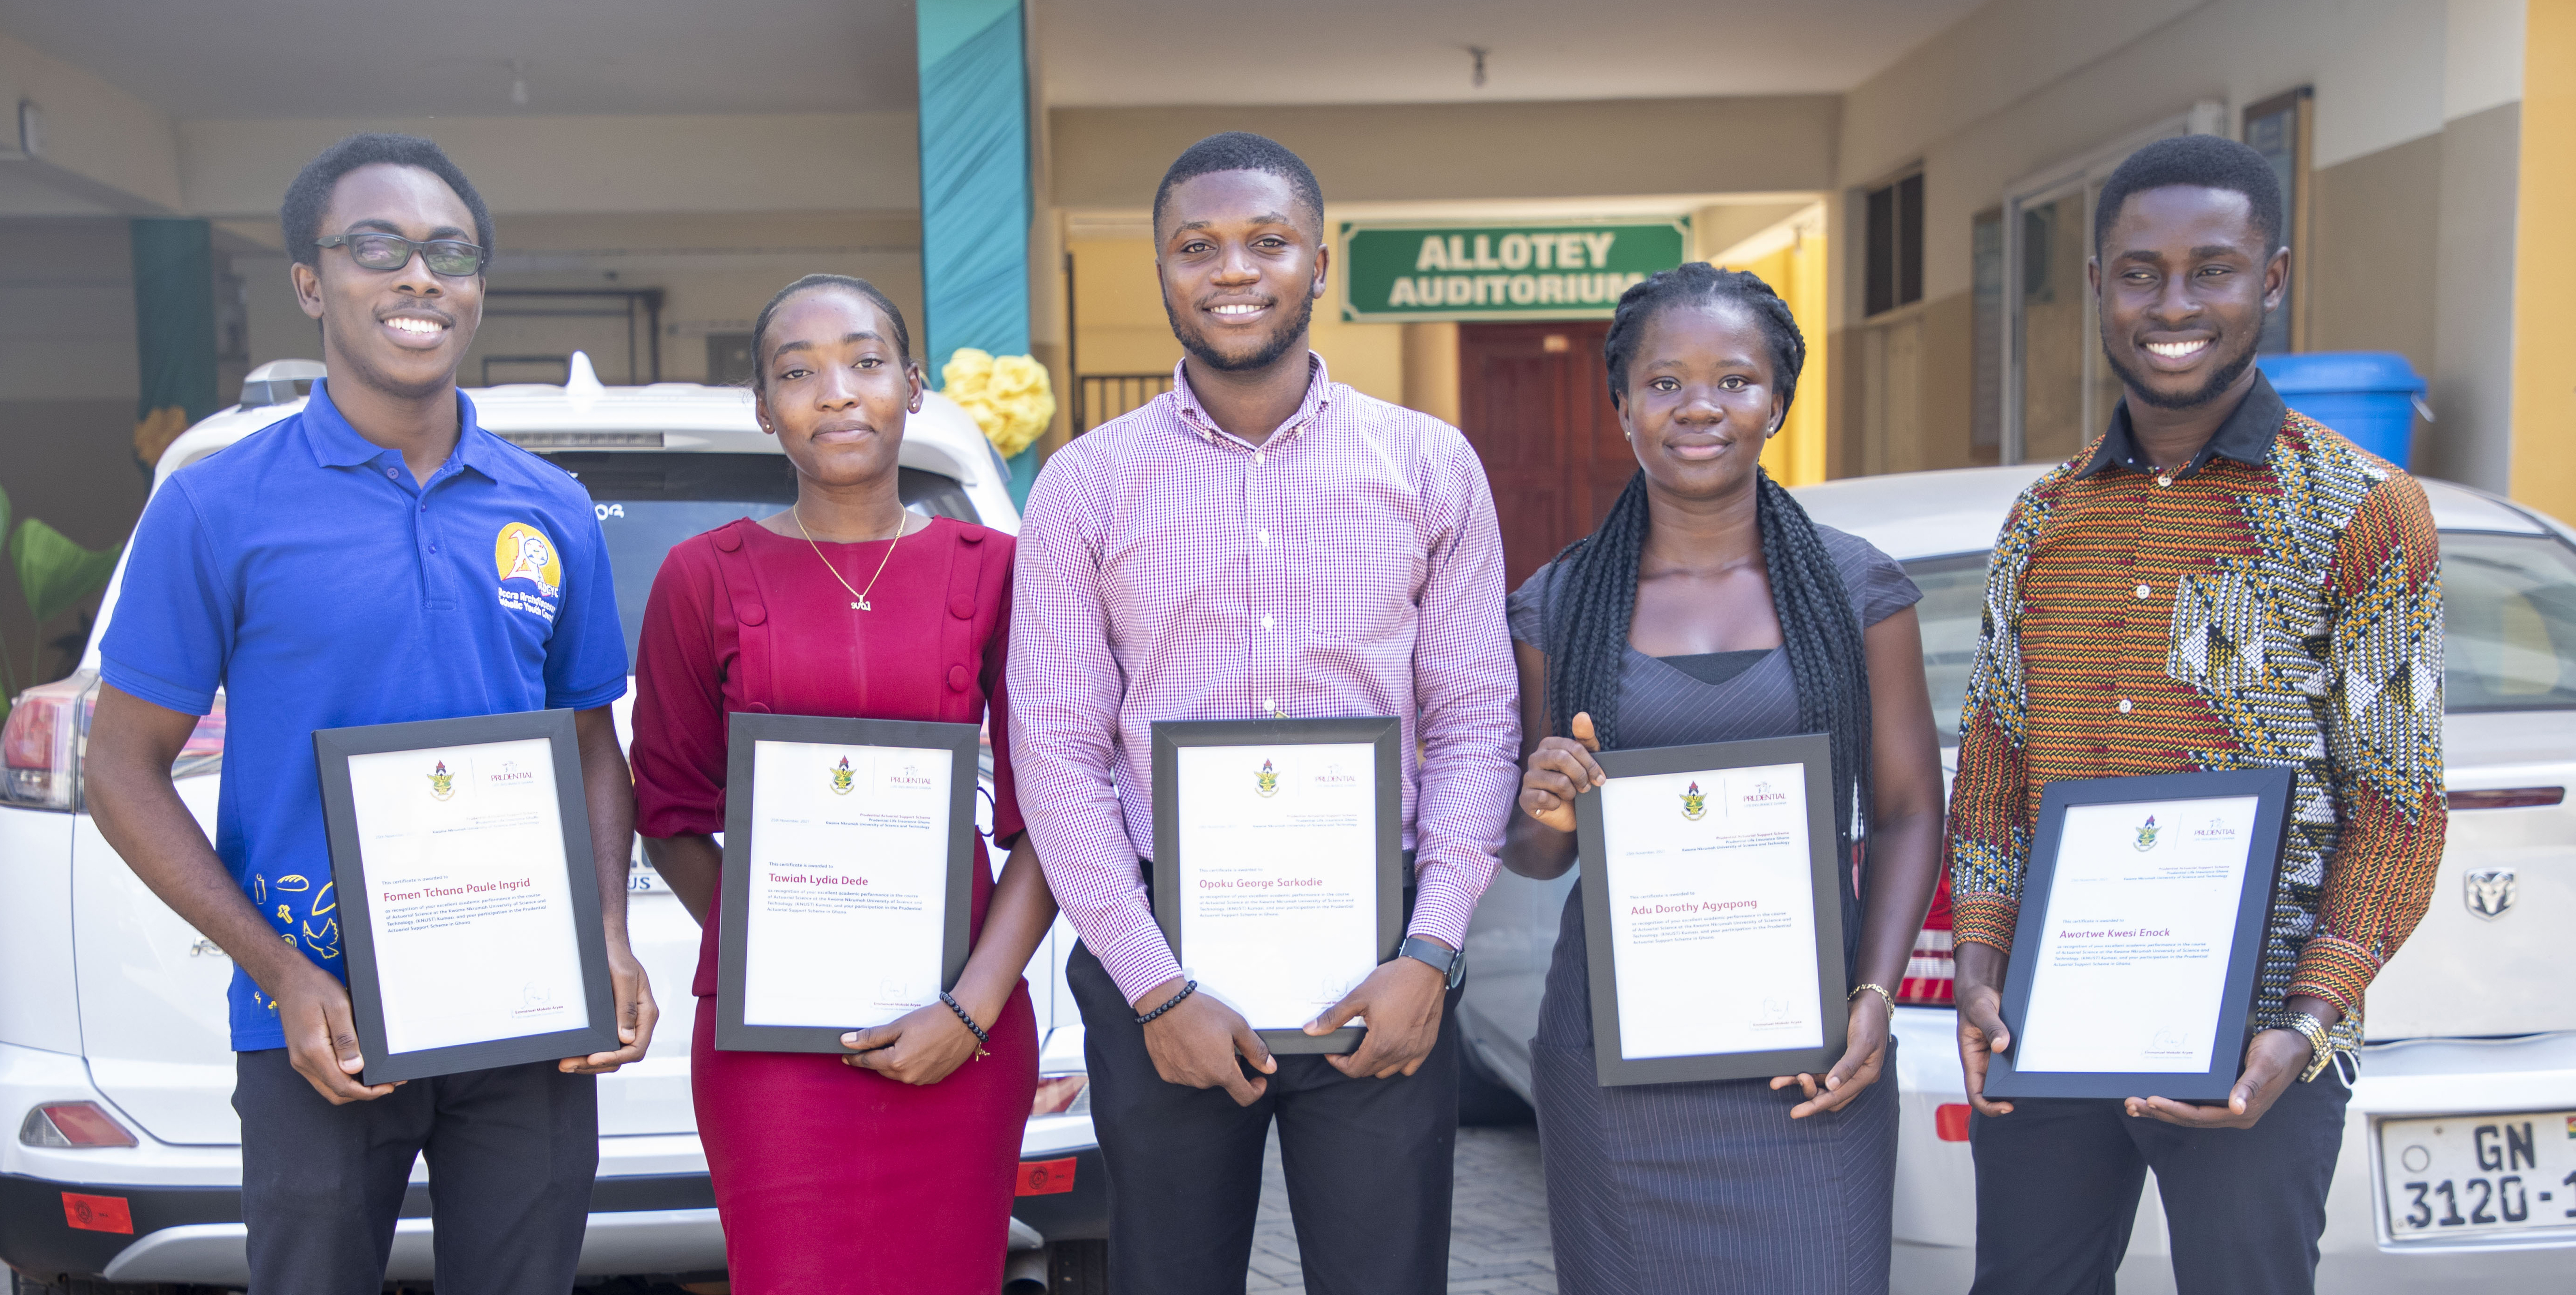 PRUDENTIAL LIFE INSURANCE AWARDS TOP 5 STUDENTS IN STATISTICS AND ACTUARIAL SCIENCE